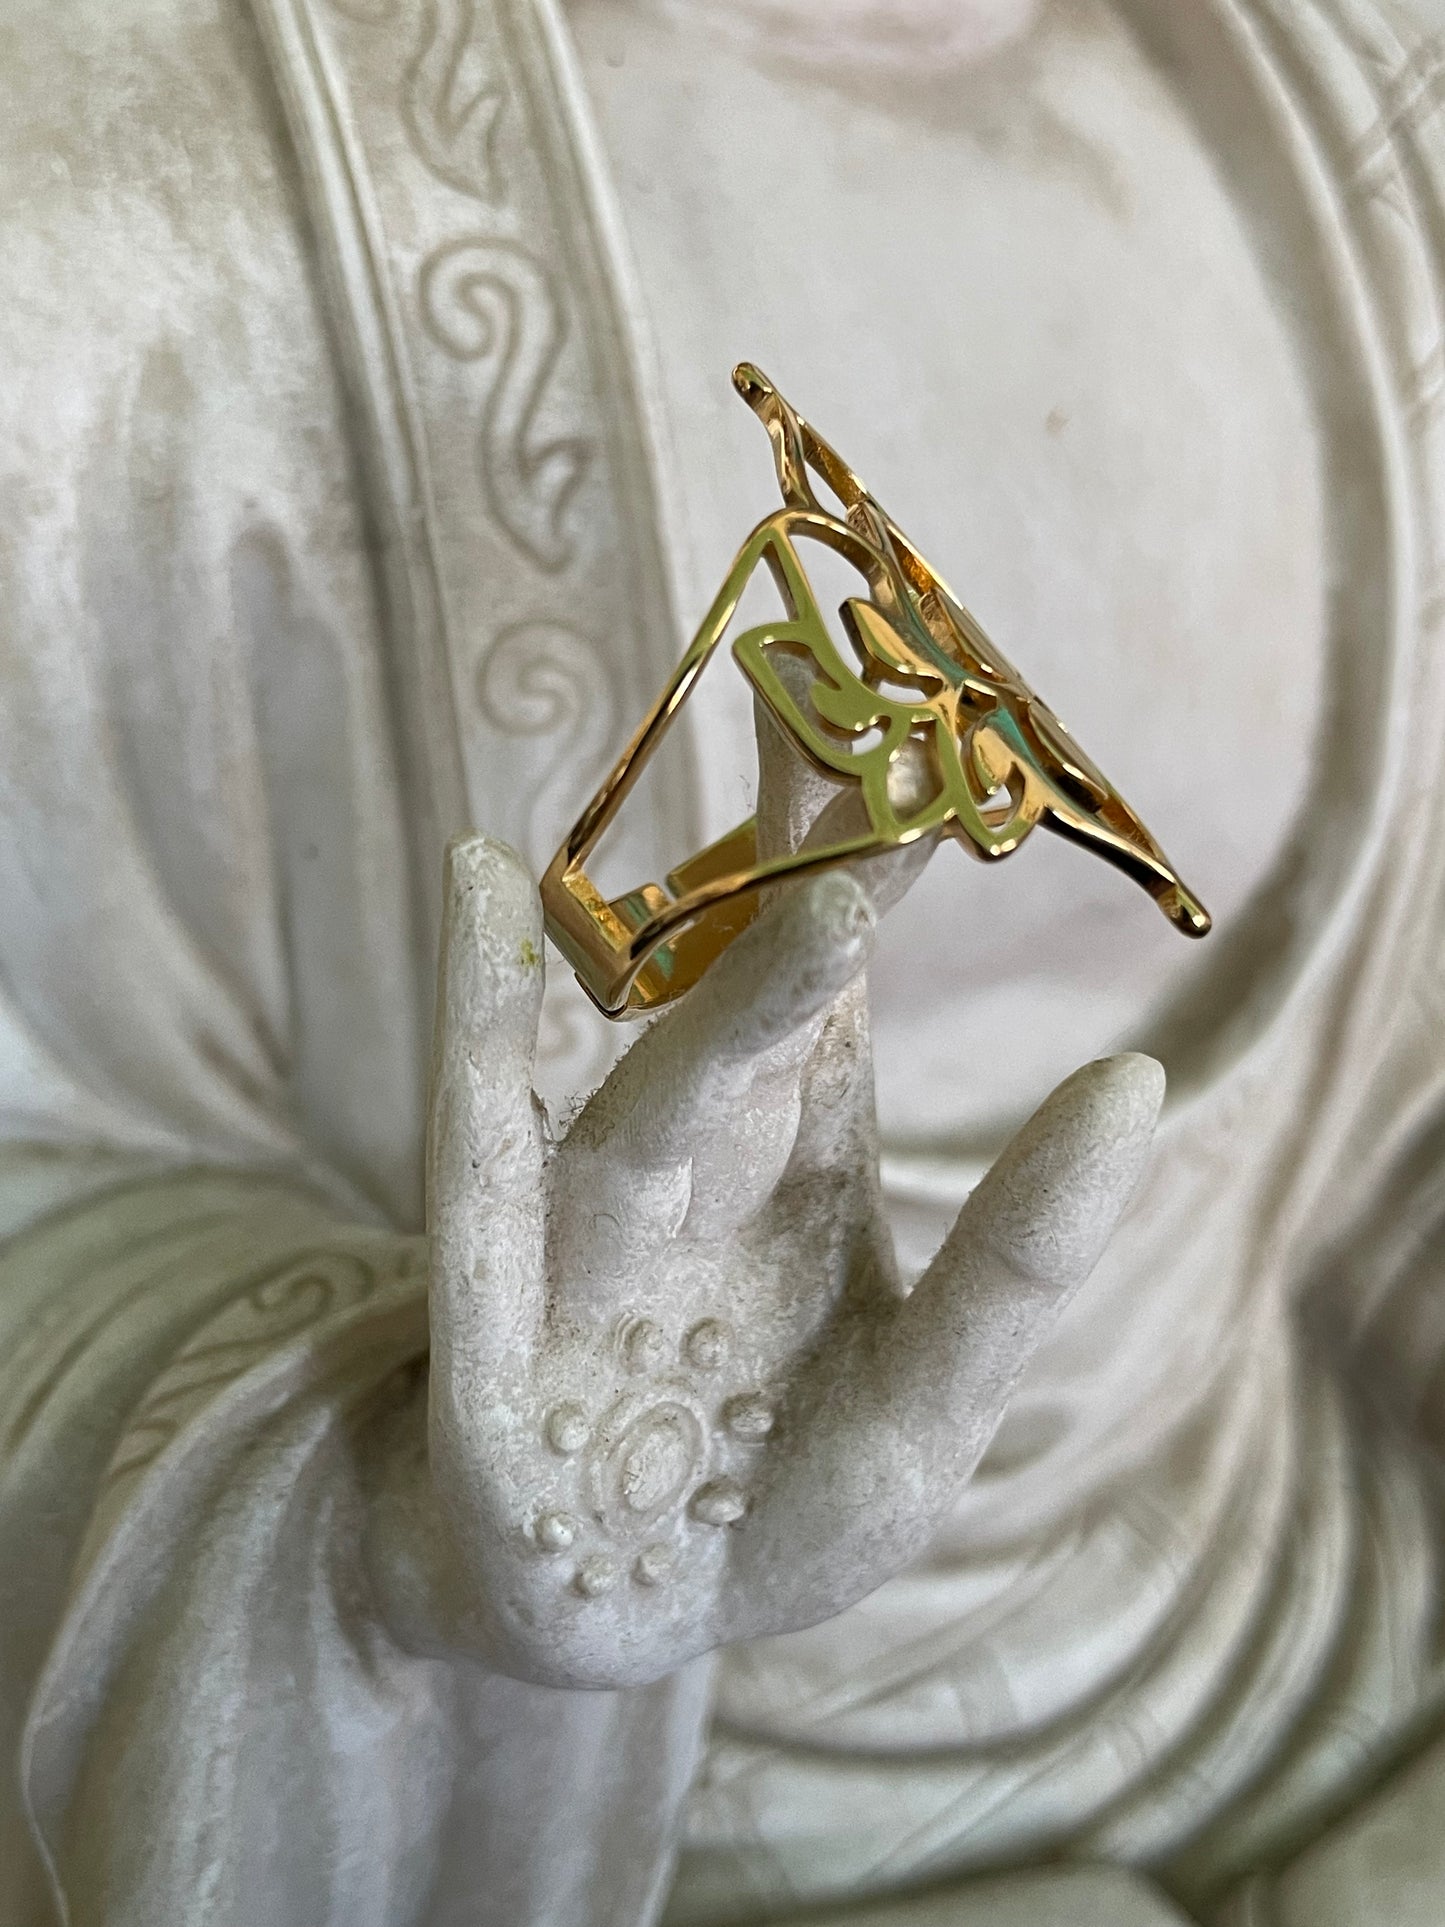 Lotus Flower Ring - Shiny Gold plated stainless steel